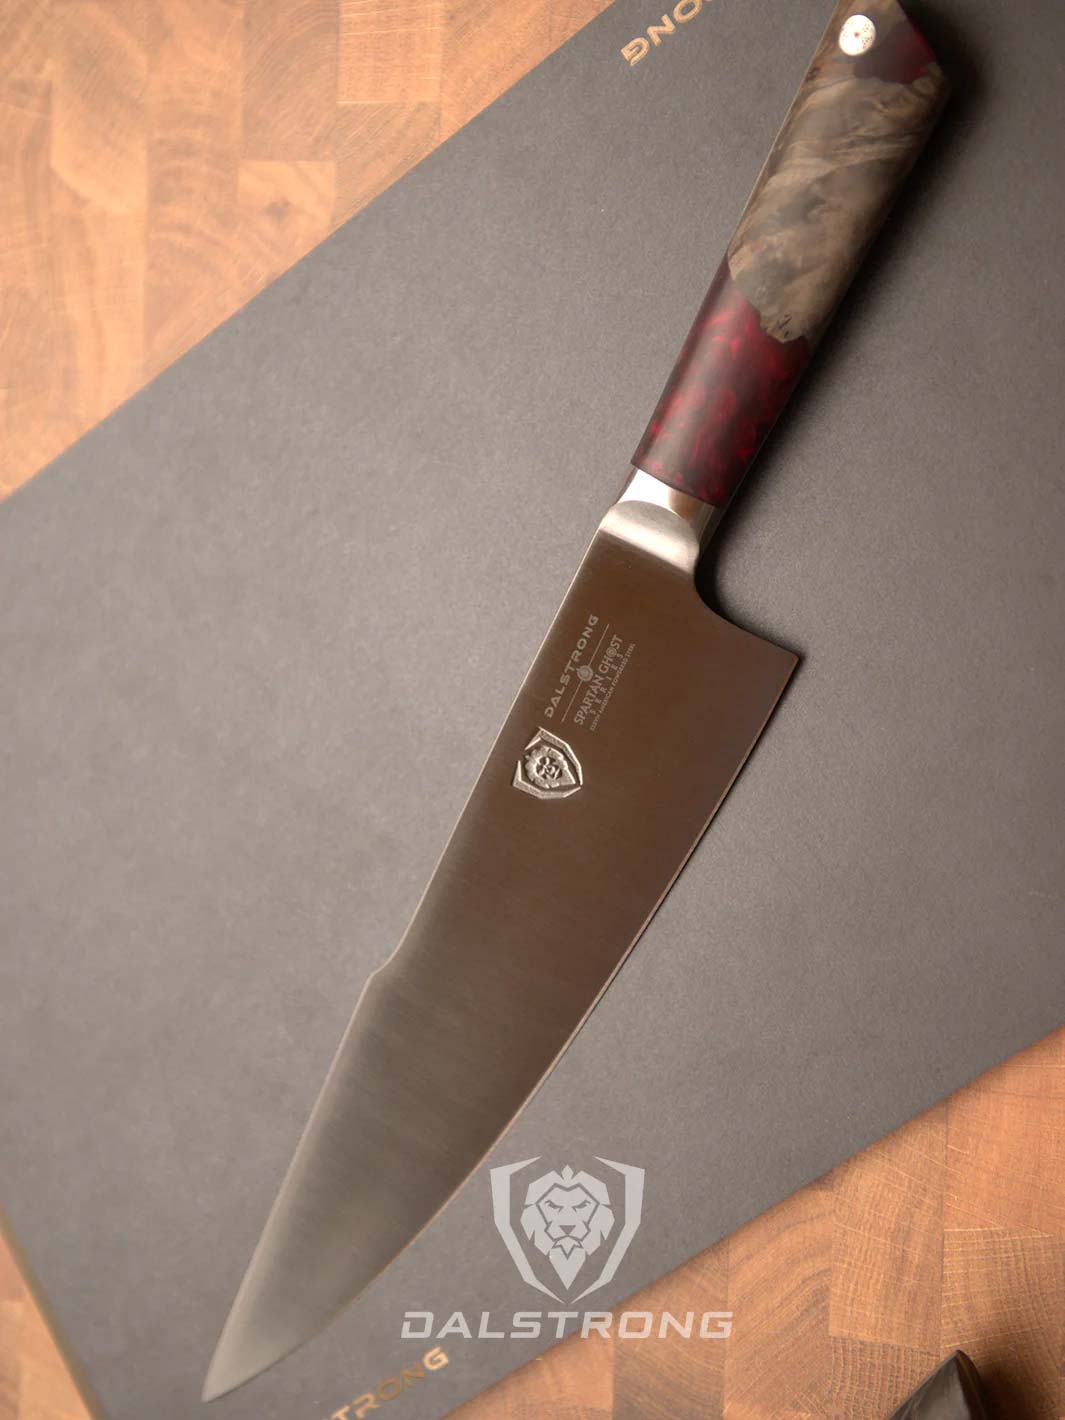 Dalstrong spartan ghost series 8 inch chef knife on a cutting board.